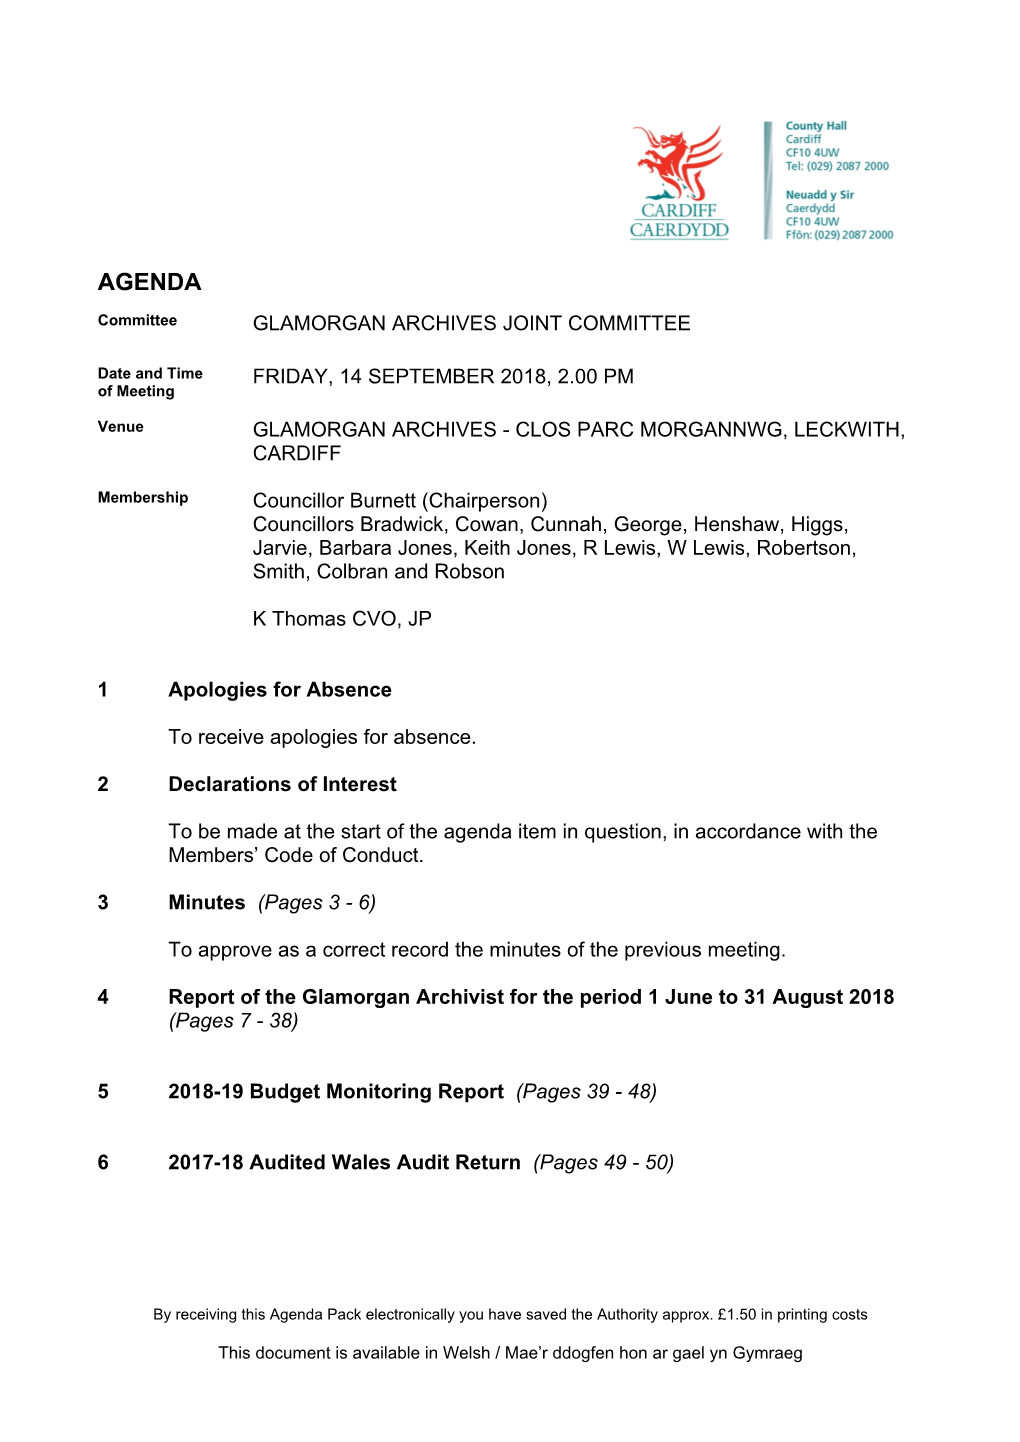 (Public Pack)Agenda Document for Glamorgan Archives Joint